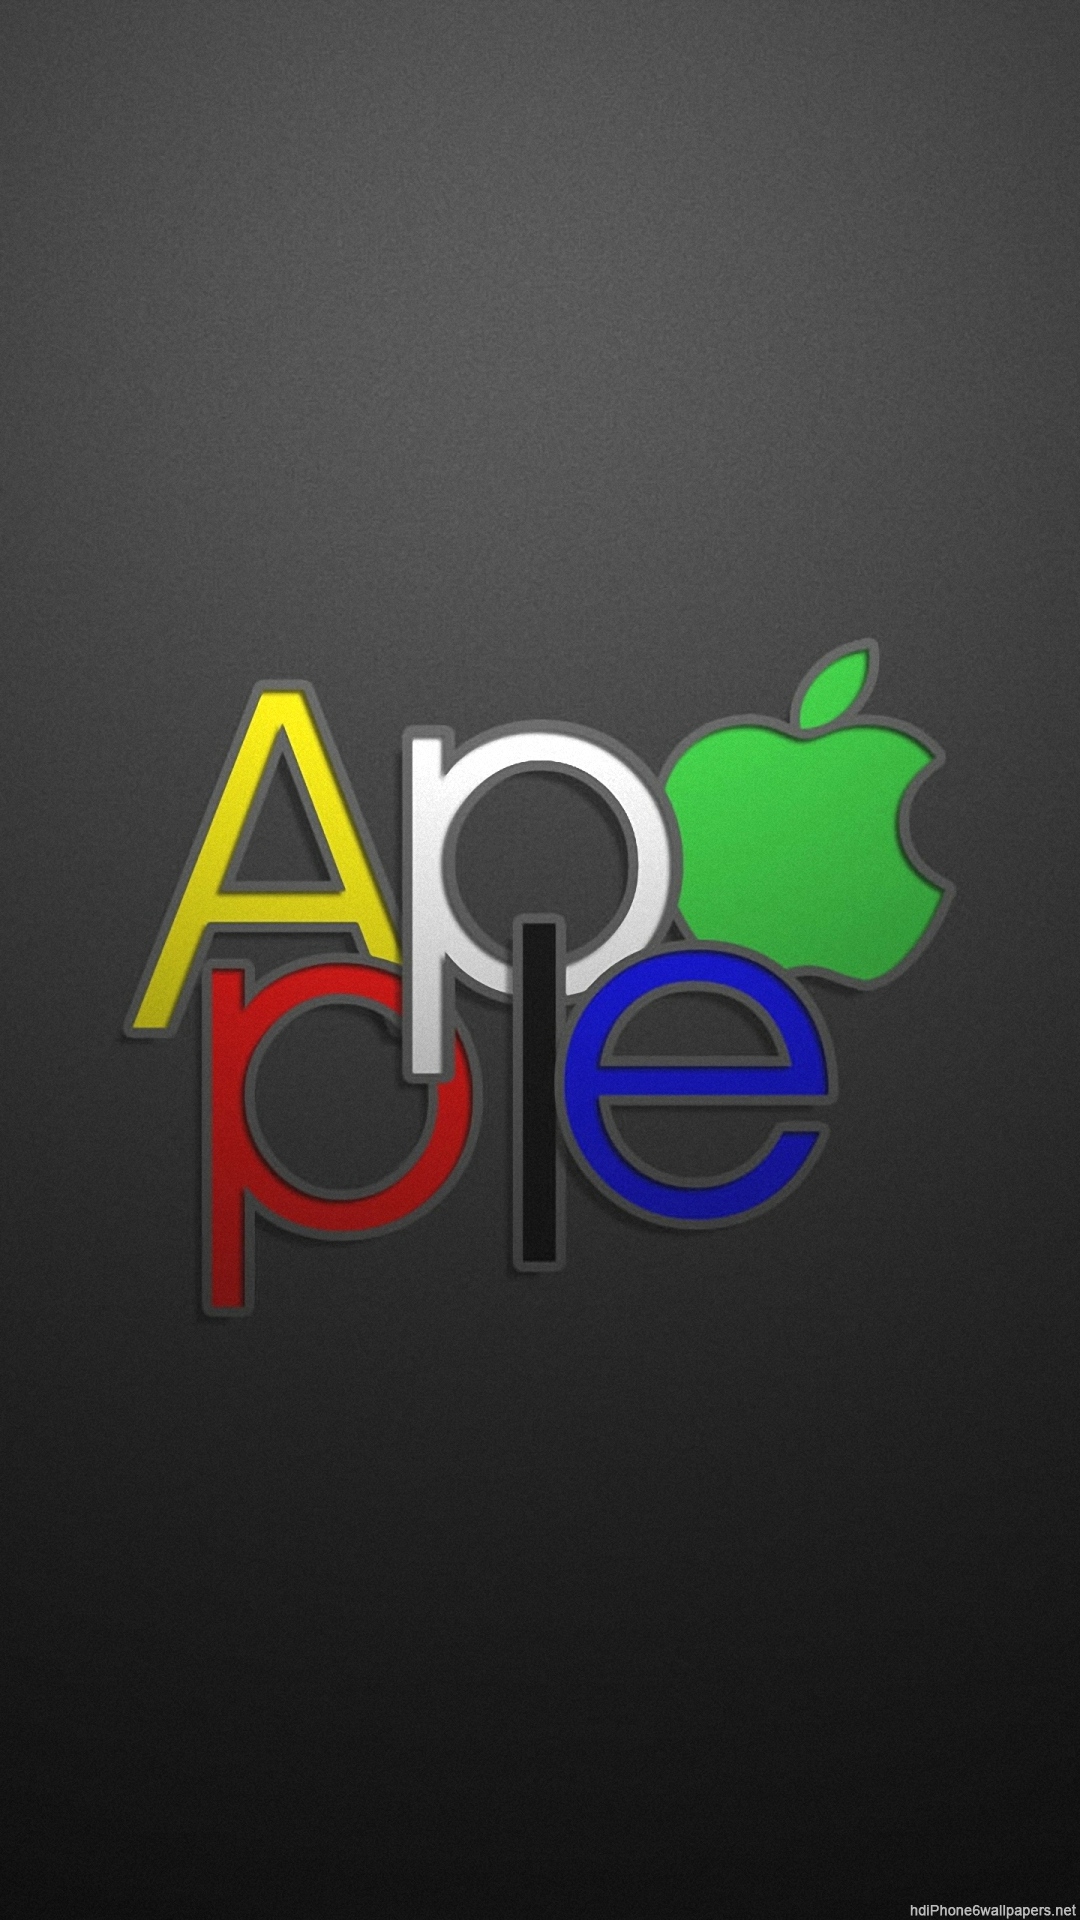 Apple Iphone Wallpaper Hd Wc64ai - Colorful Apple Iphone Wallpaper Full Hd - HD Wallpaper 